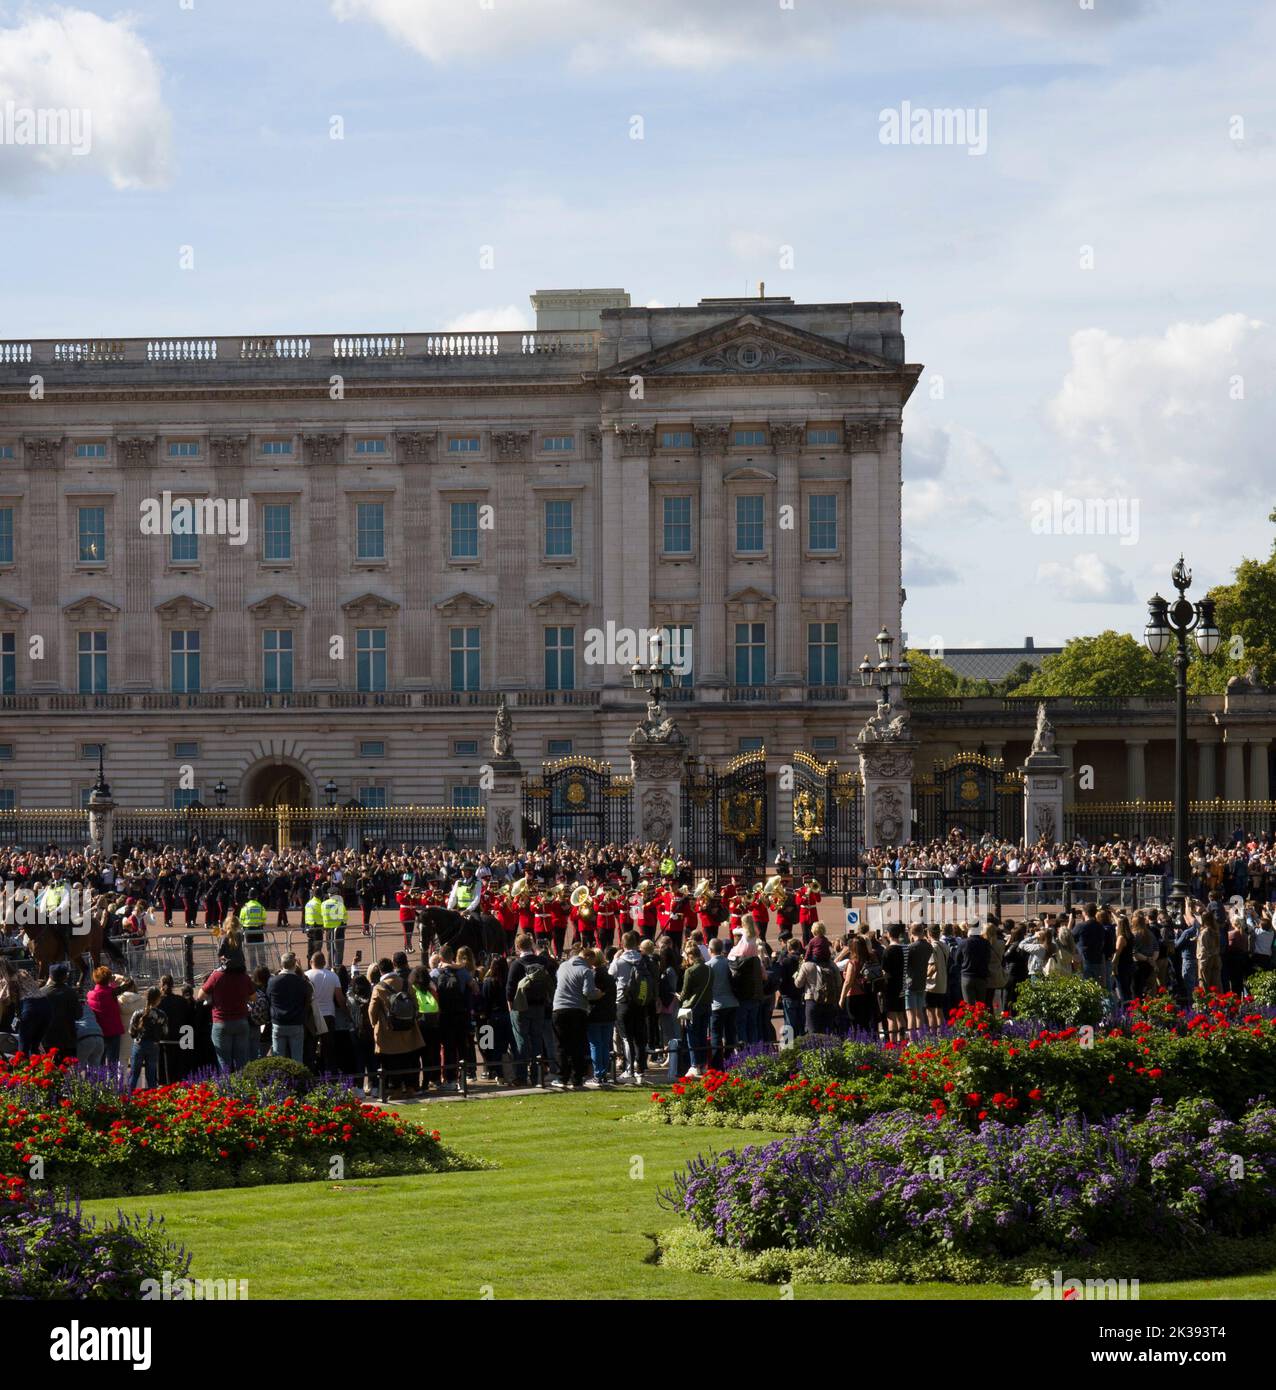 Crowds of Sightseers and Tourists Watching Marching Guards Band Queen Victoria Monument and Buckingham Palace London Stock Photo